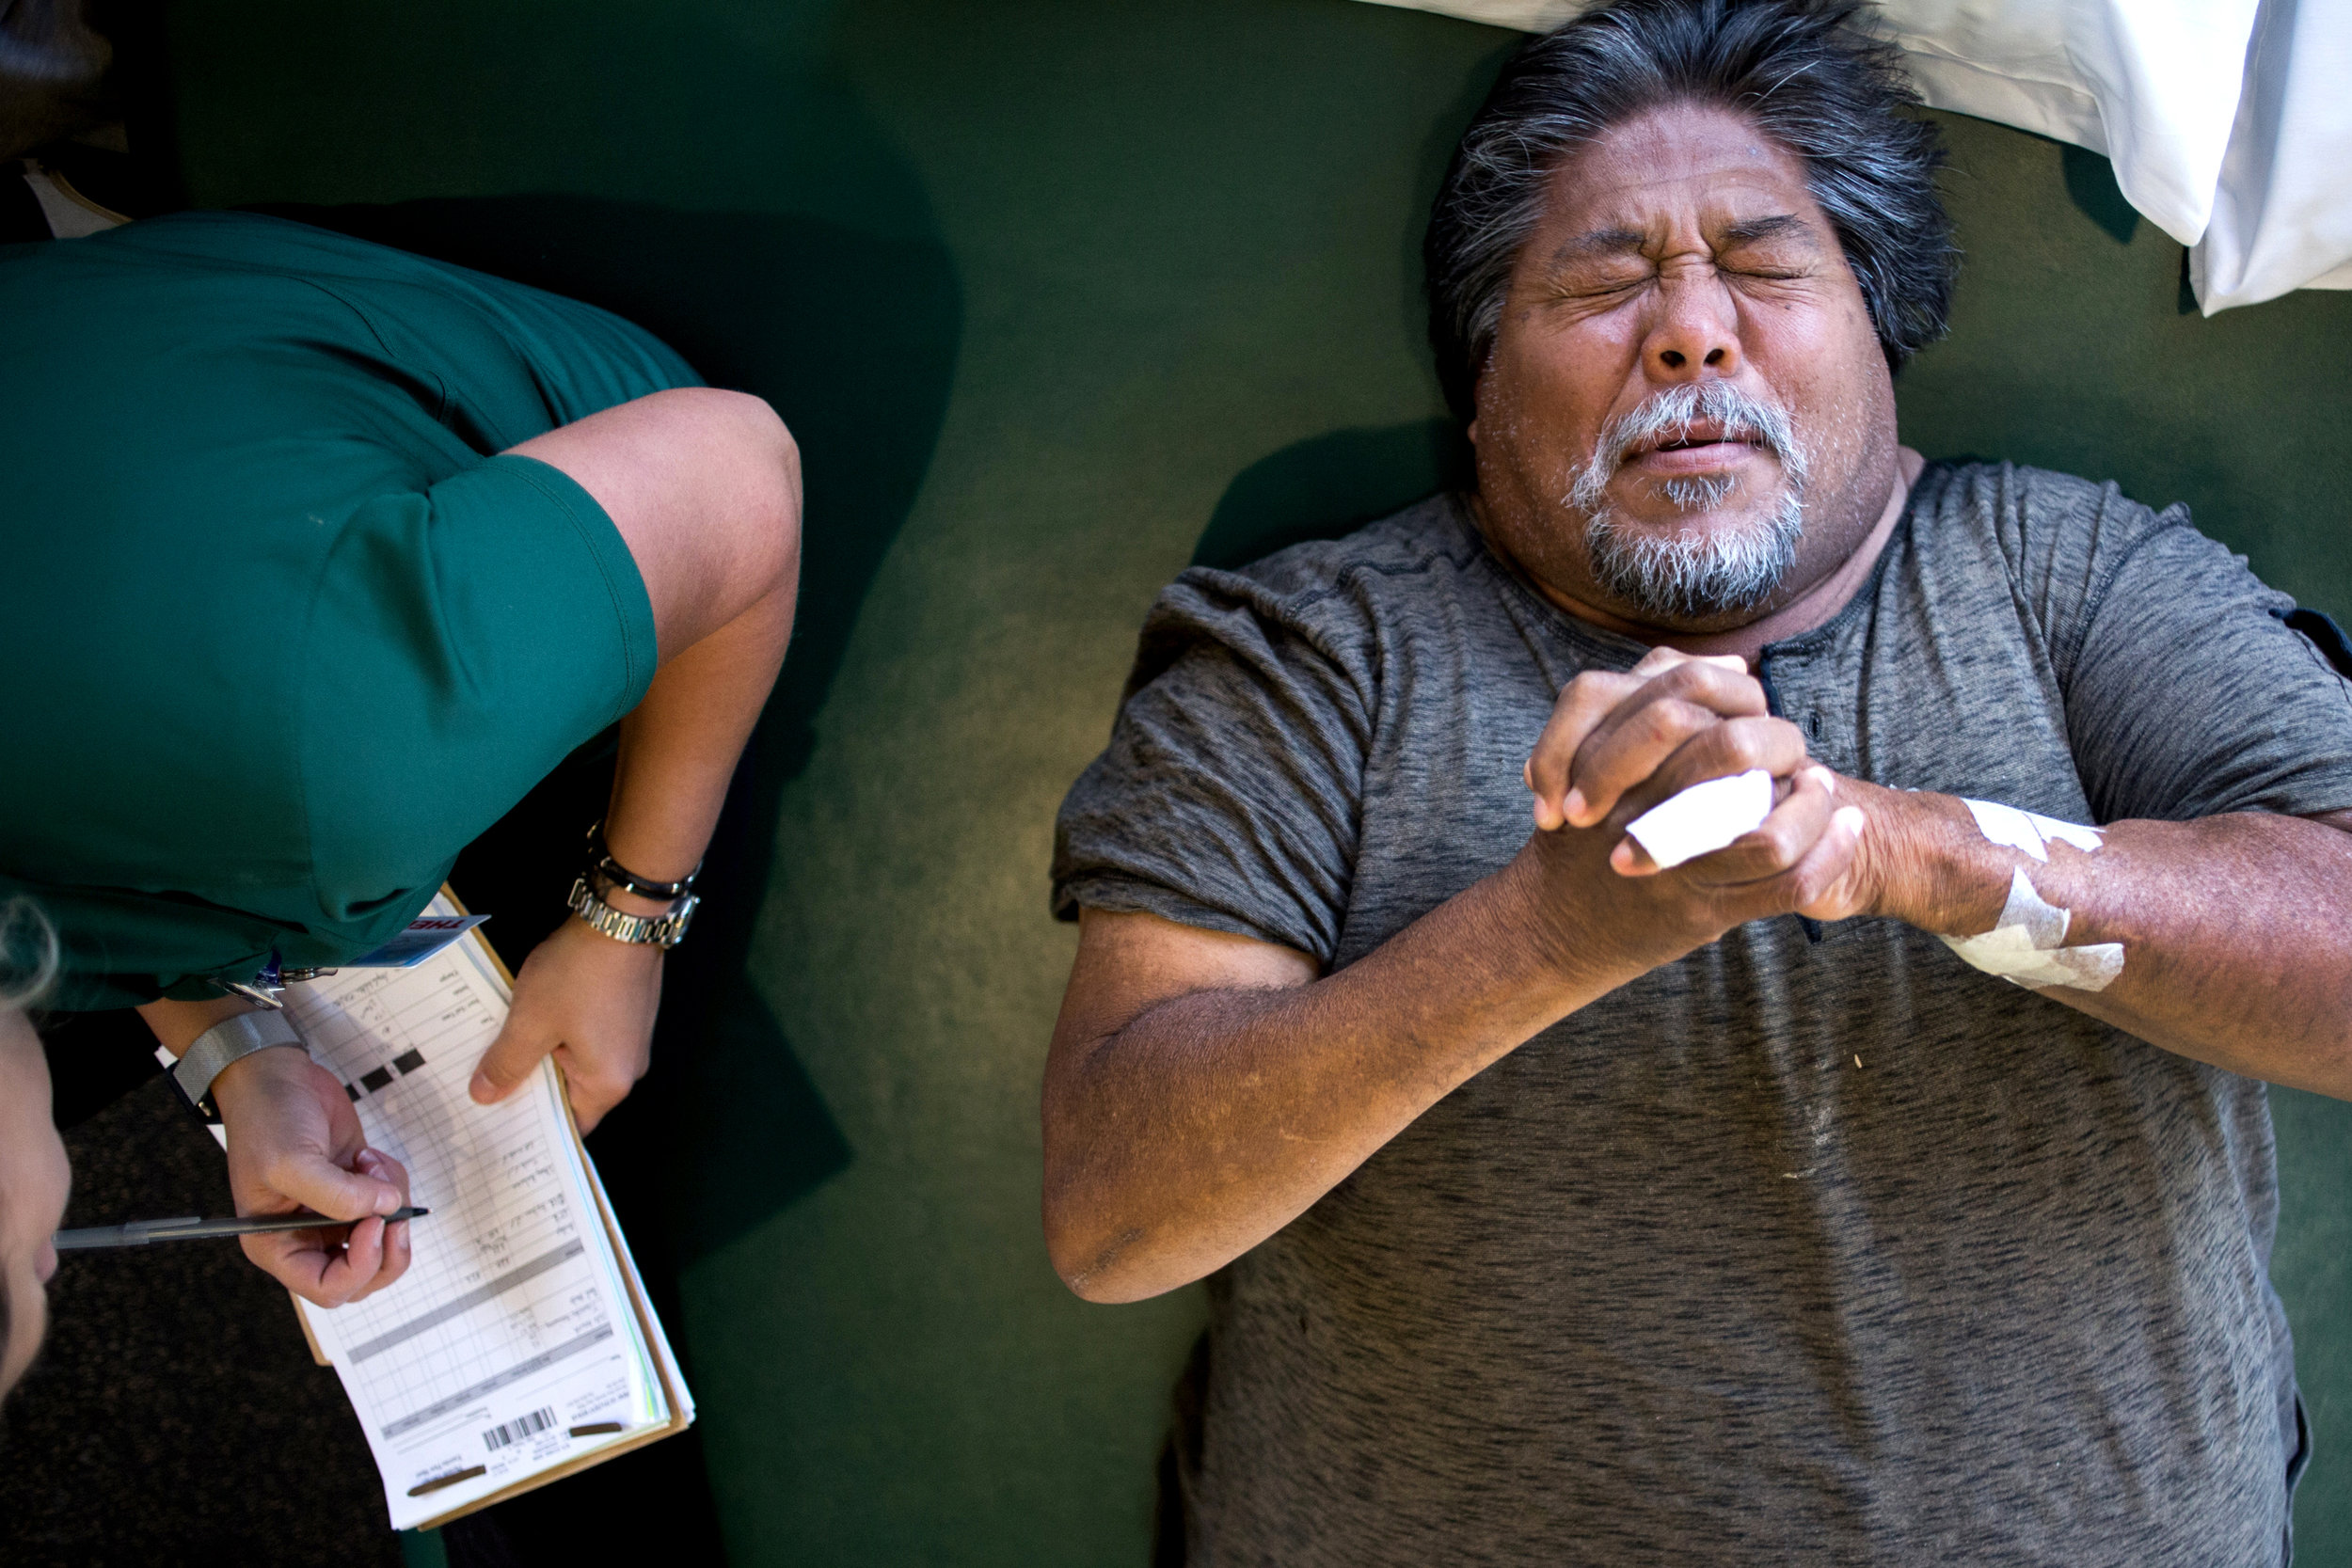  Richard Mata, 54, attends weekly physical therapy appointments to strengthen the muscles in his legs after an accident left him paralyzed from the waist down. 